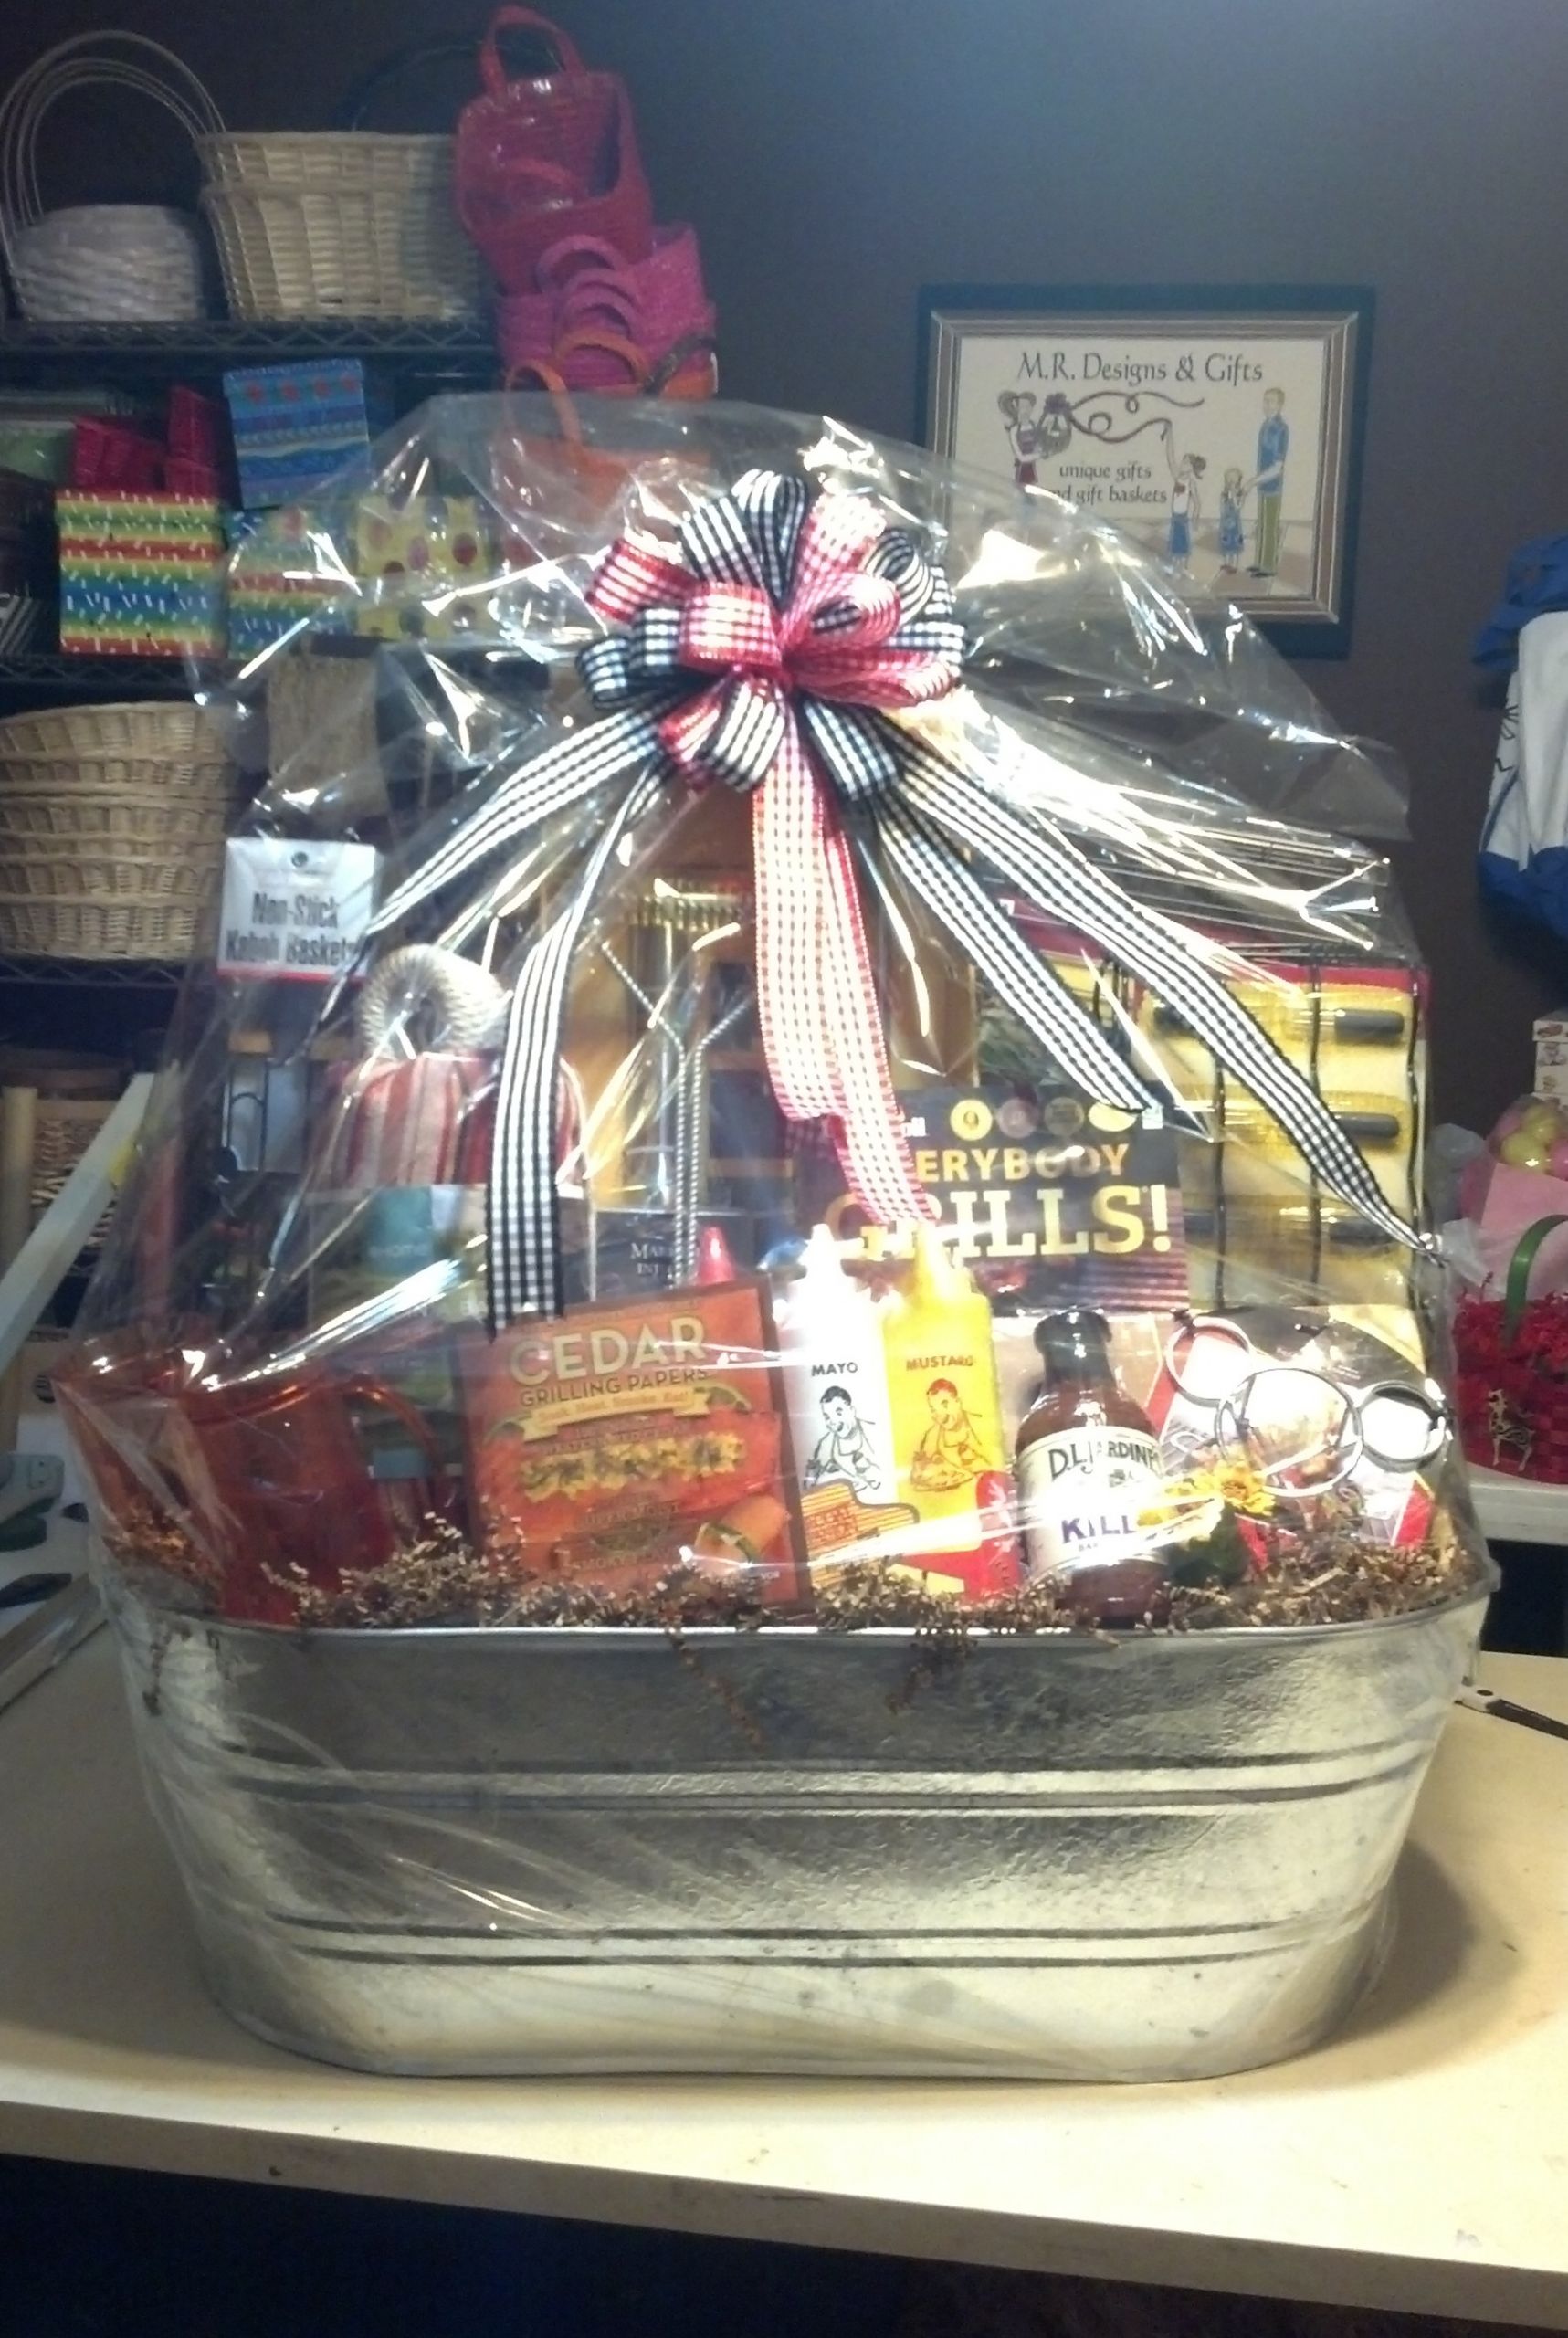 Fundraiser Gift Basket Ideas
 Special Event and Silent Auction Gift Basket Ideas by M R